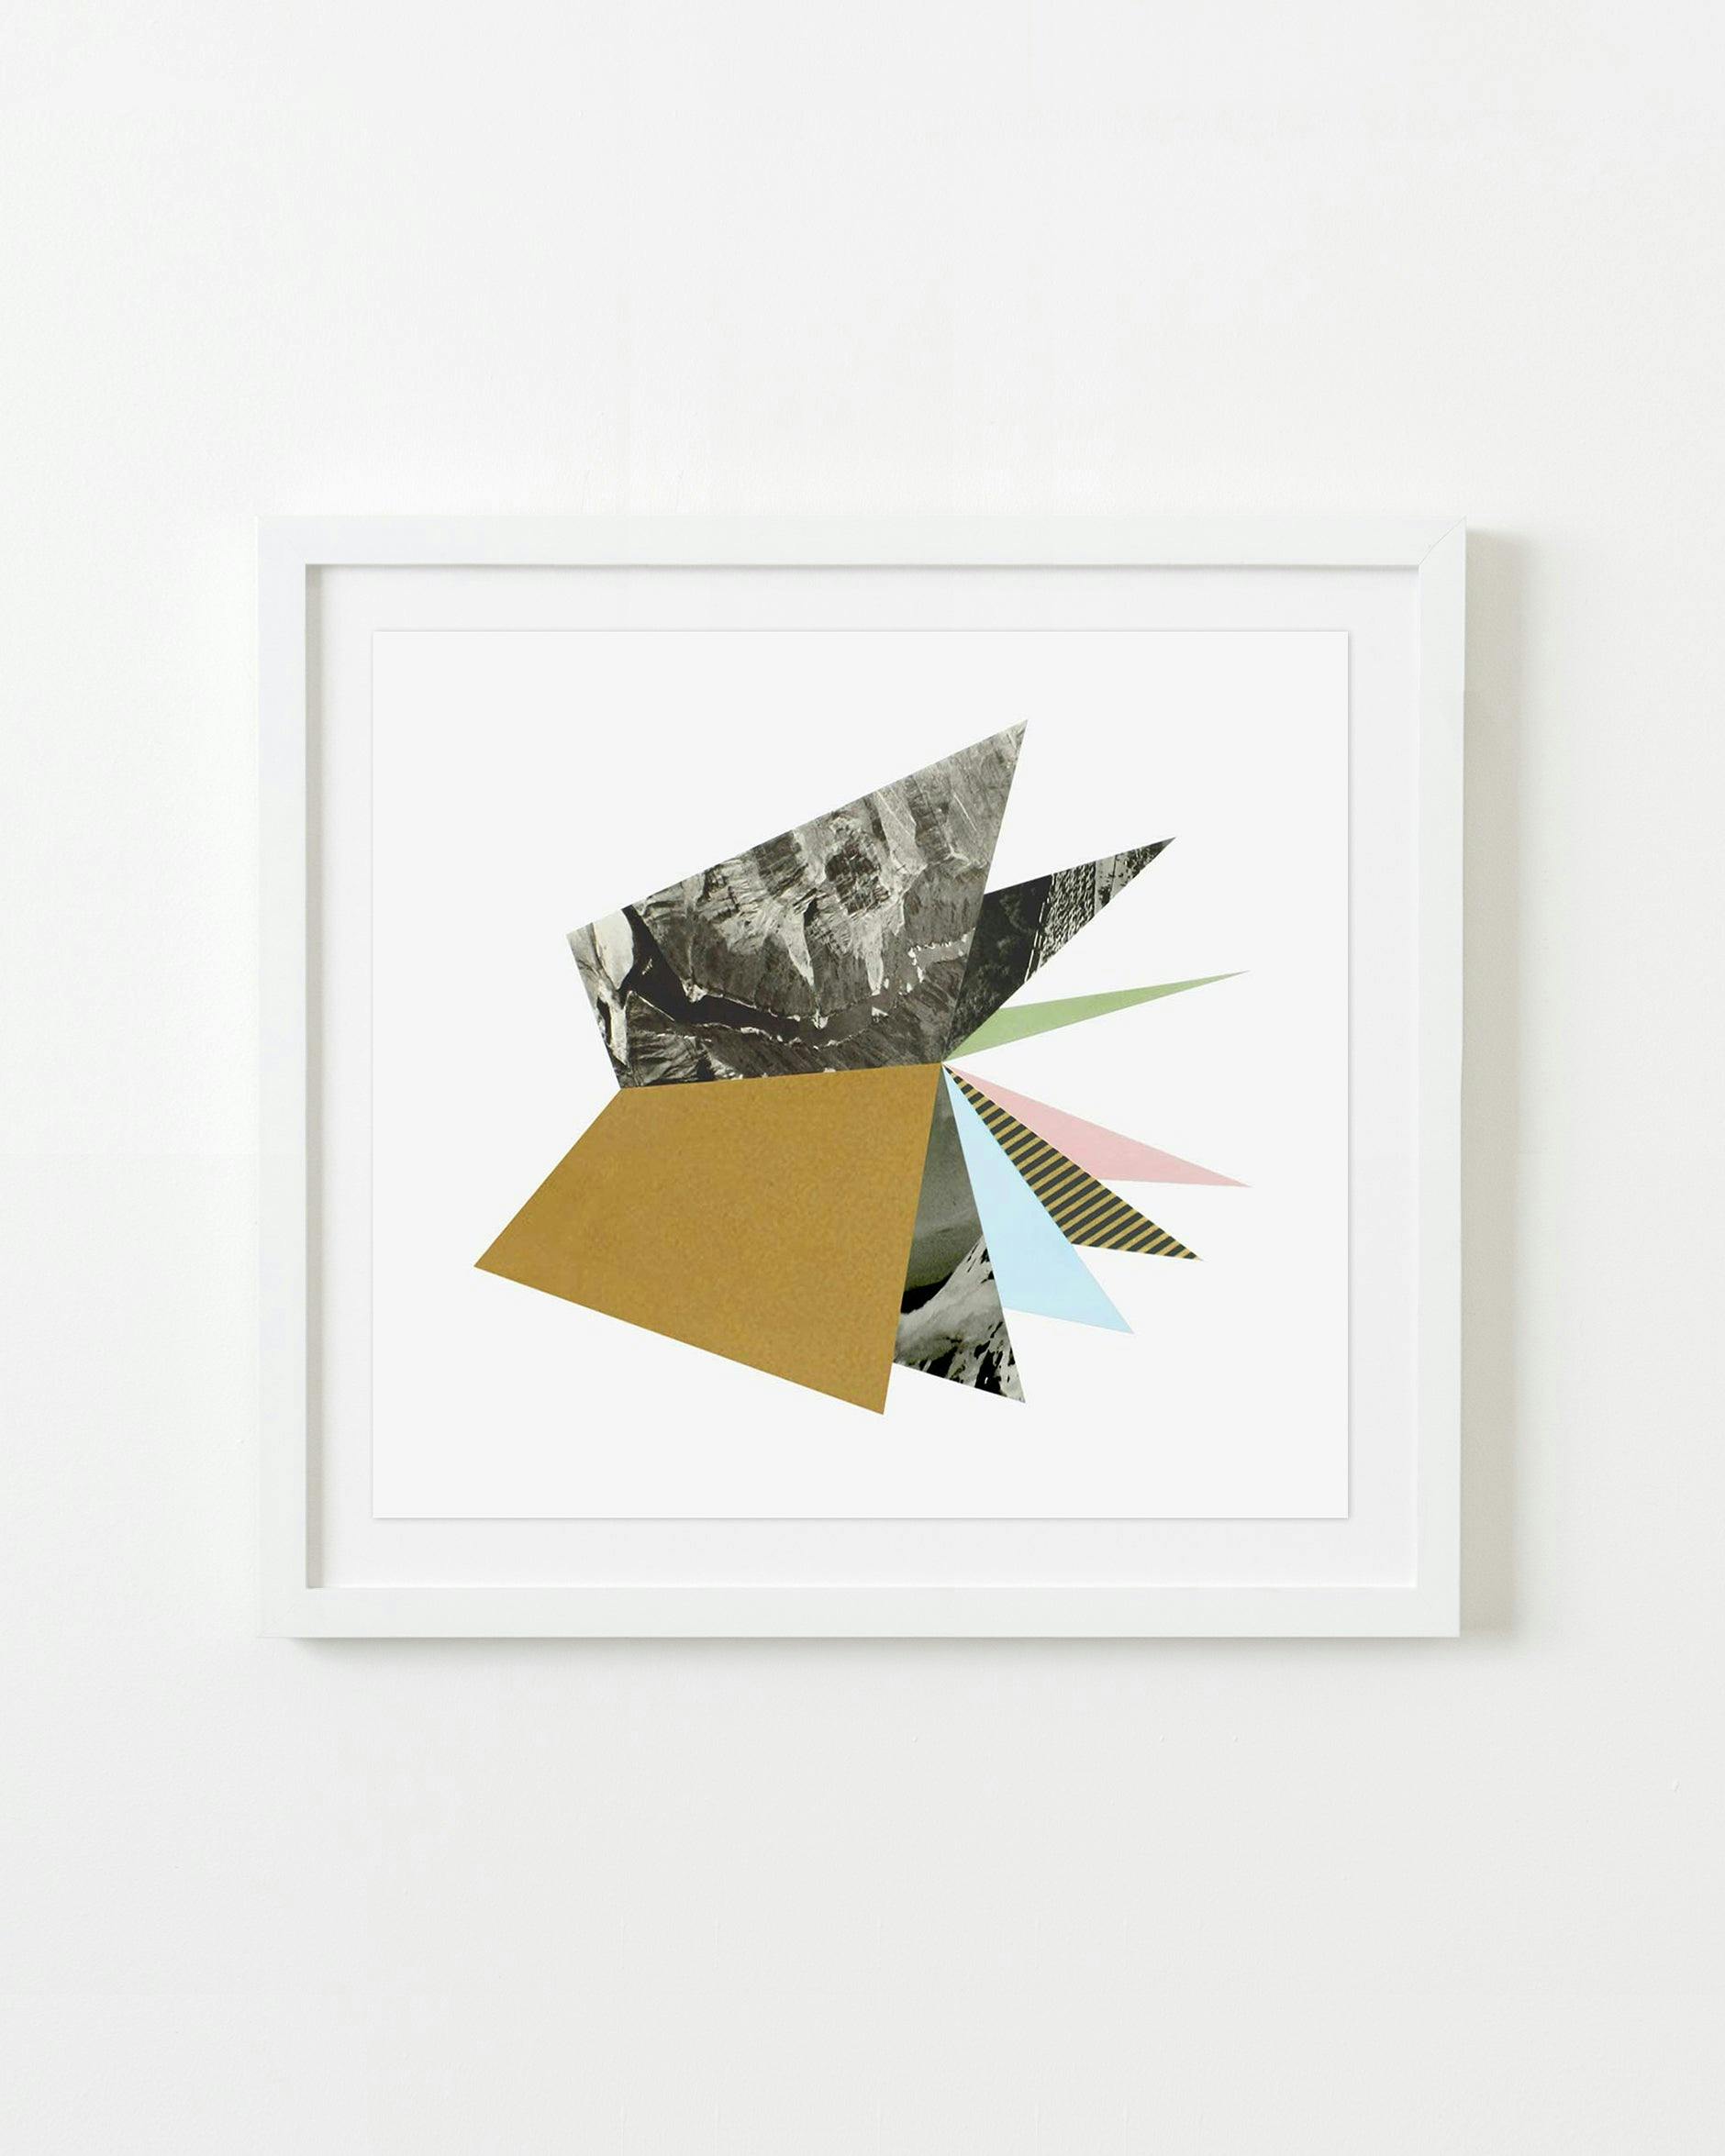 Mixed Media by Matthew Shelley titled "Rolodex 5".